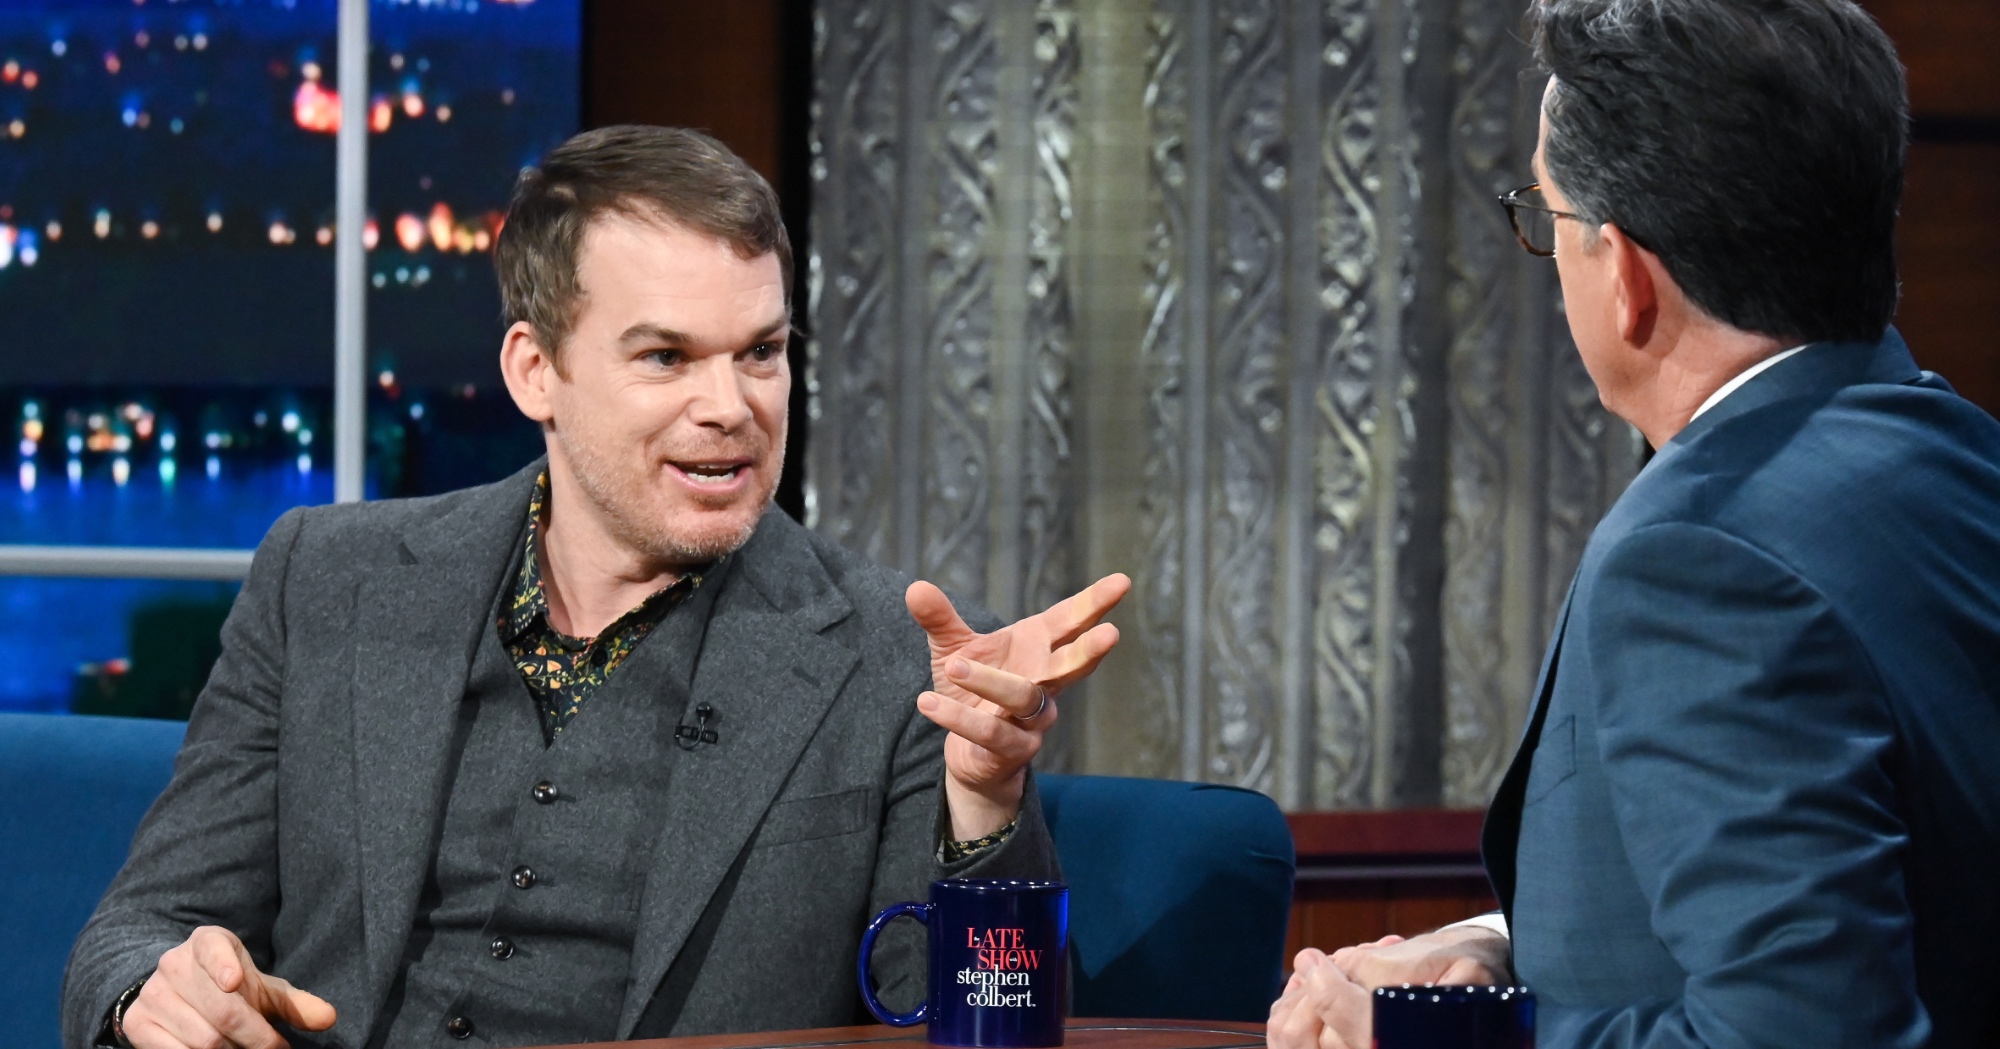 'The Late Show with Stephen Colbert' and guest Michael C. Hall from 'Dexter' wearing grey suit.